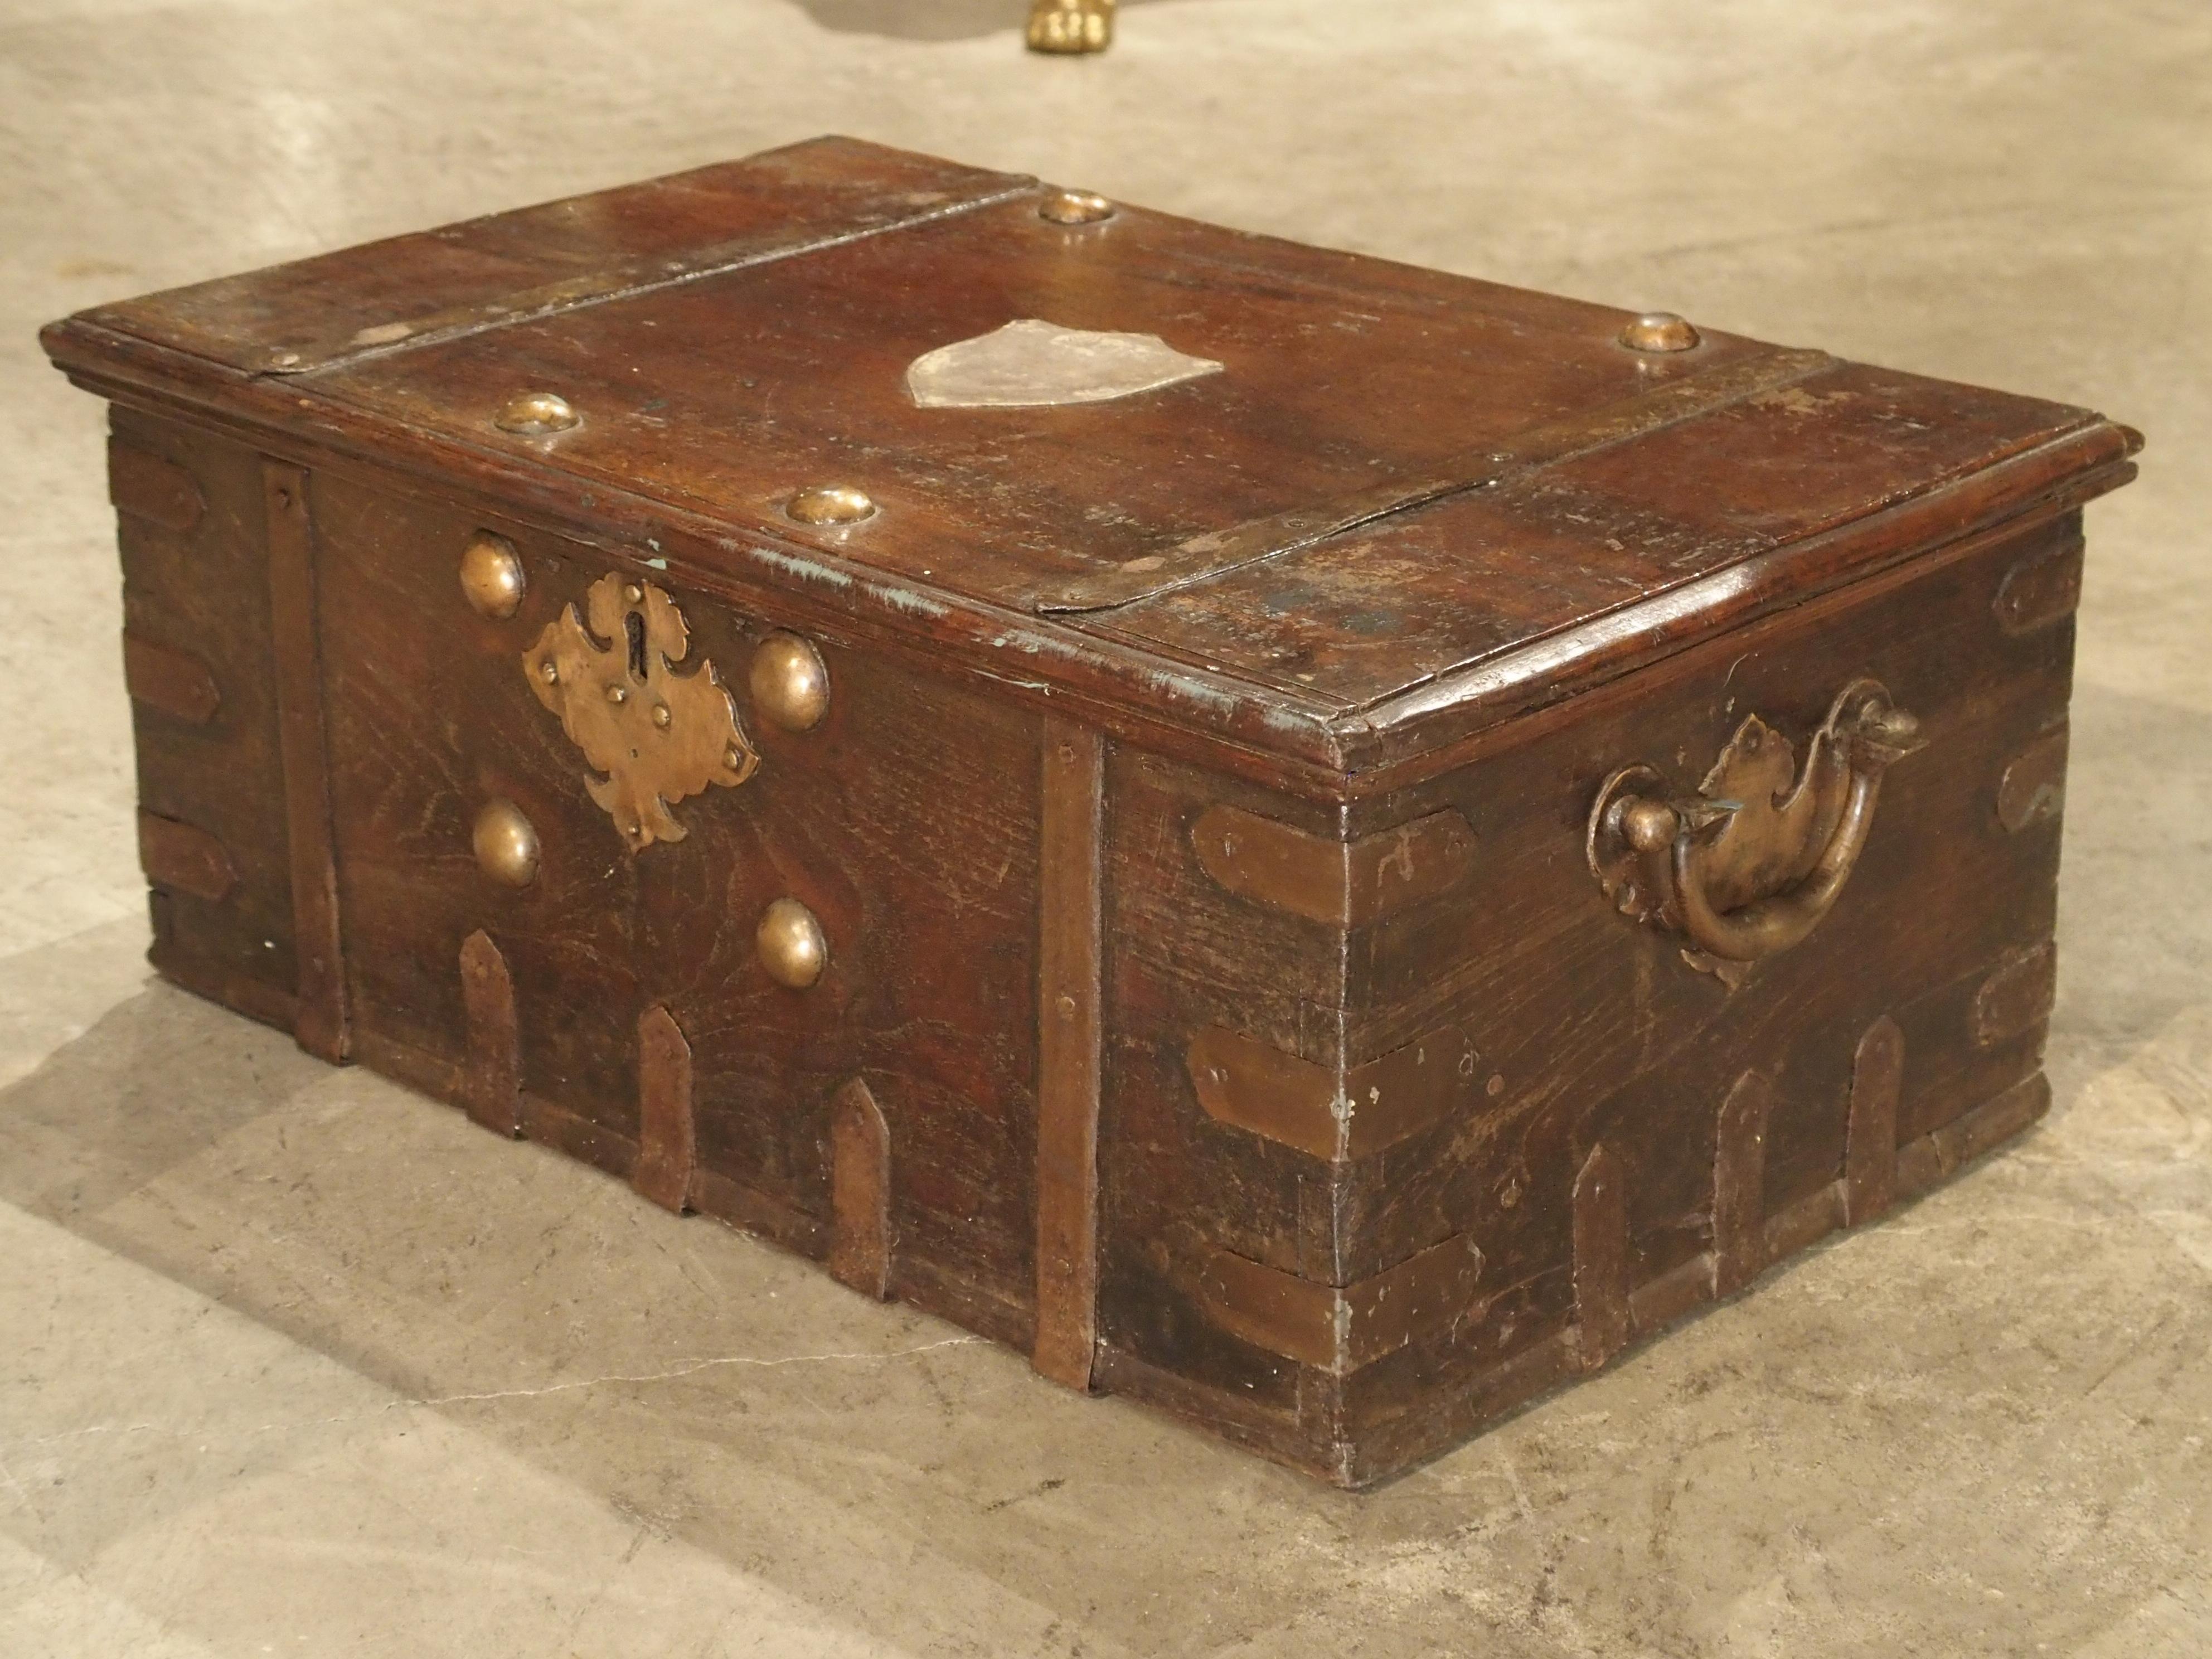 Hand-Carved Antique Iron Mounted Mahogany Trunk with Copper Handles, 19th Century